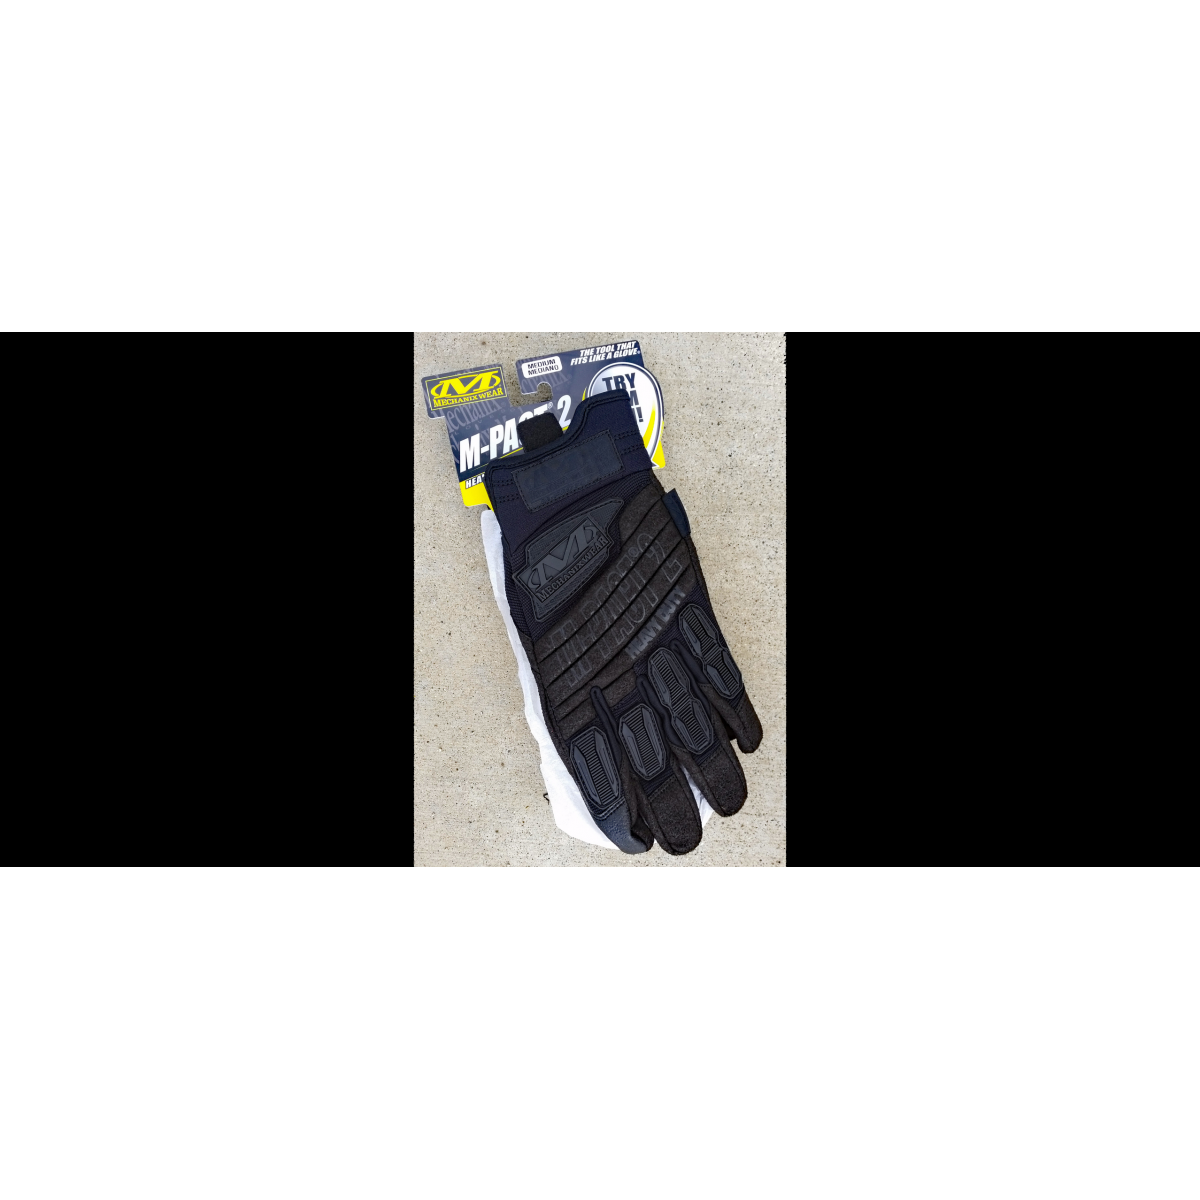 Genuine Mechanix M-Pact 2 Covert (old style) tactical gloves.